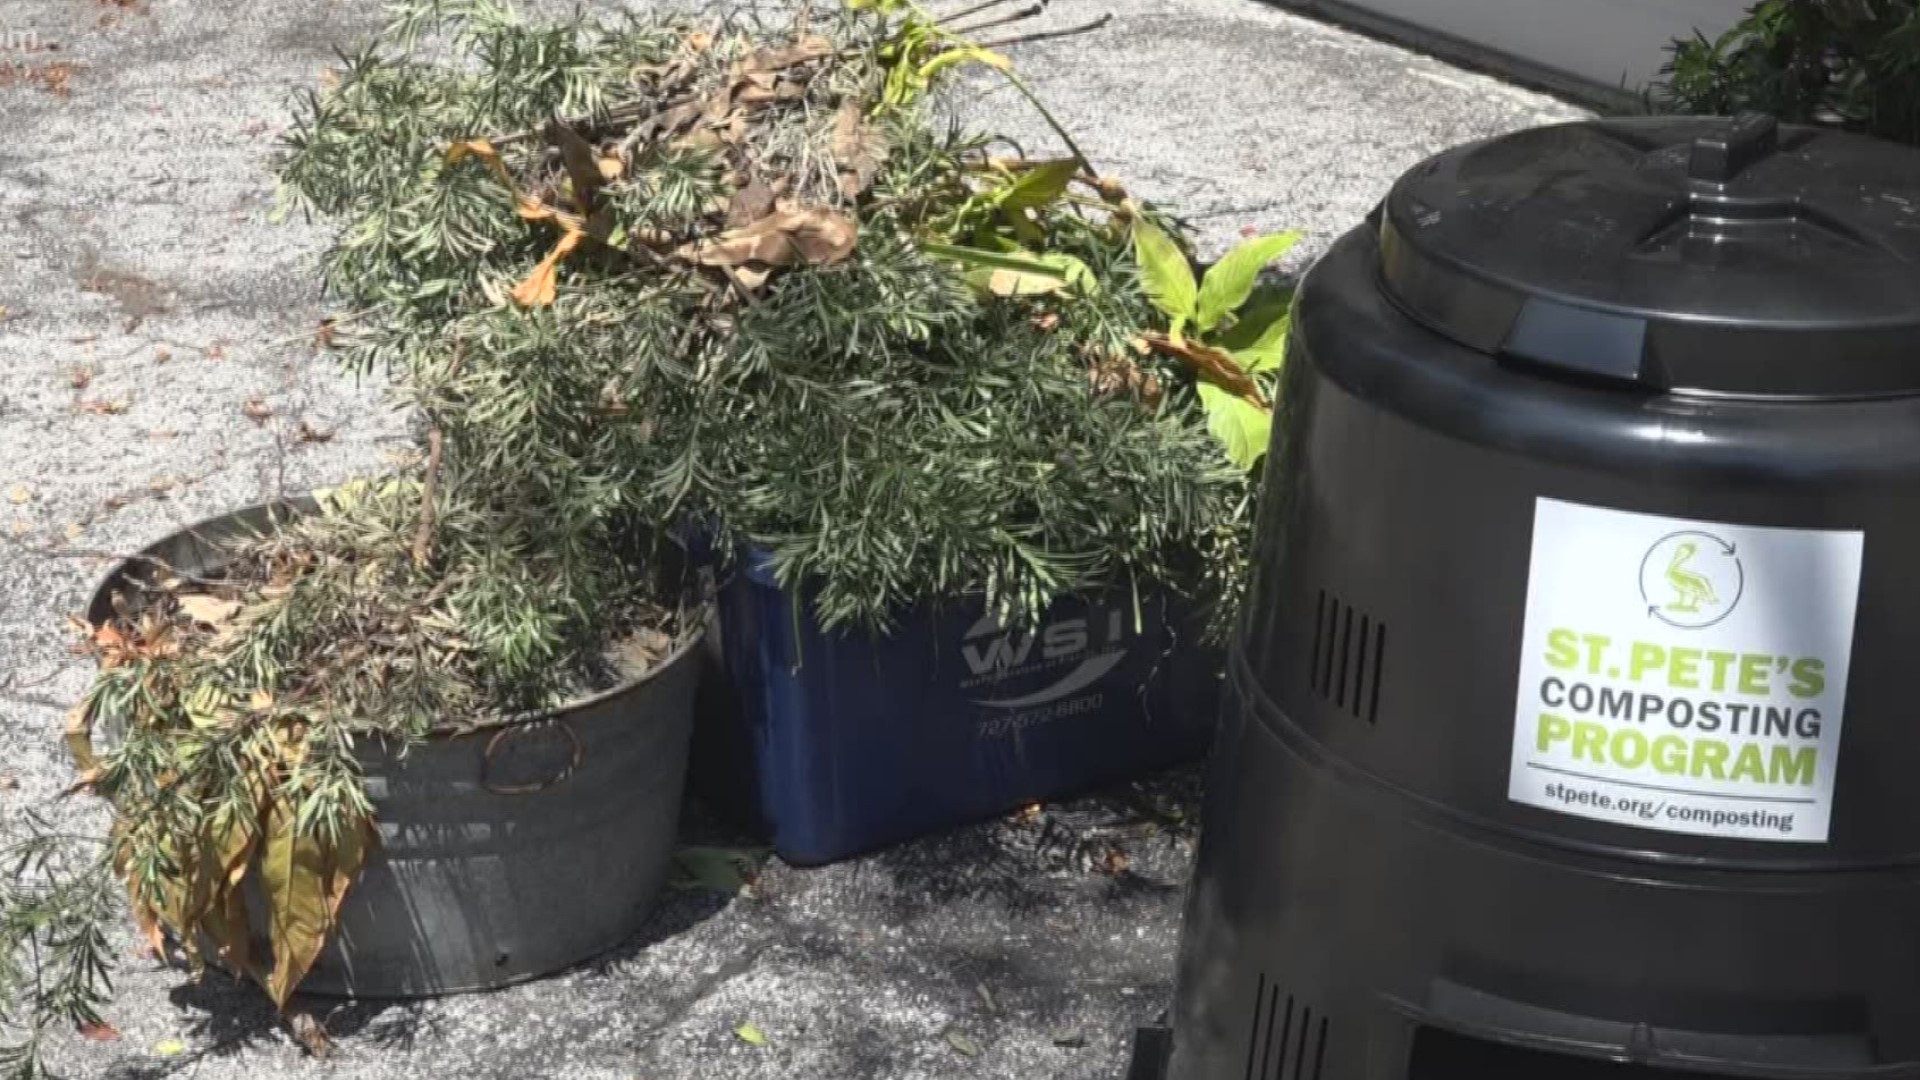 The City of St. Pete has officially launched their new composting program. Residents in single-family homes who want to get in on the action can now sign up for the free program.
This sustainable form of waste management can make a big difference, cutting down on about 30 percent of food and yard waste.